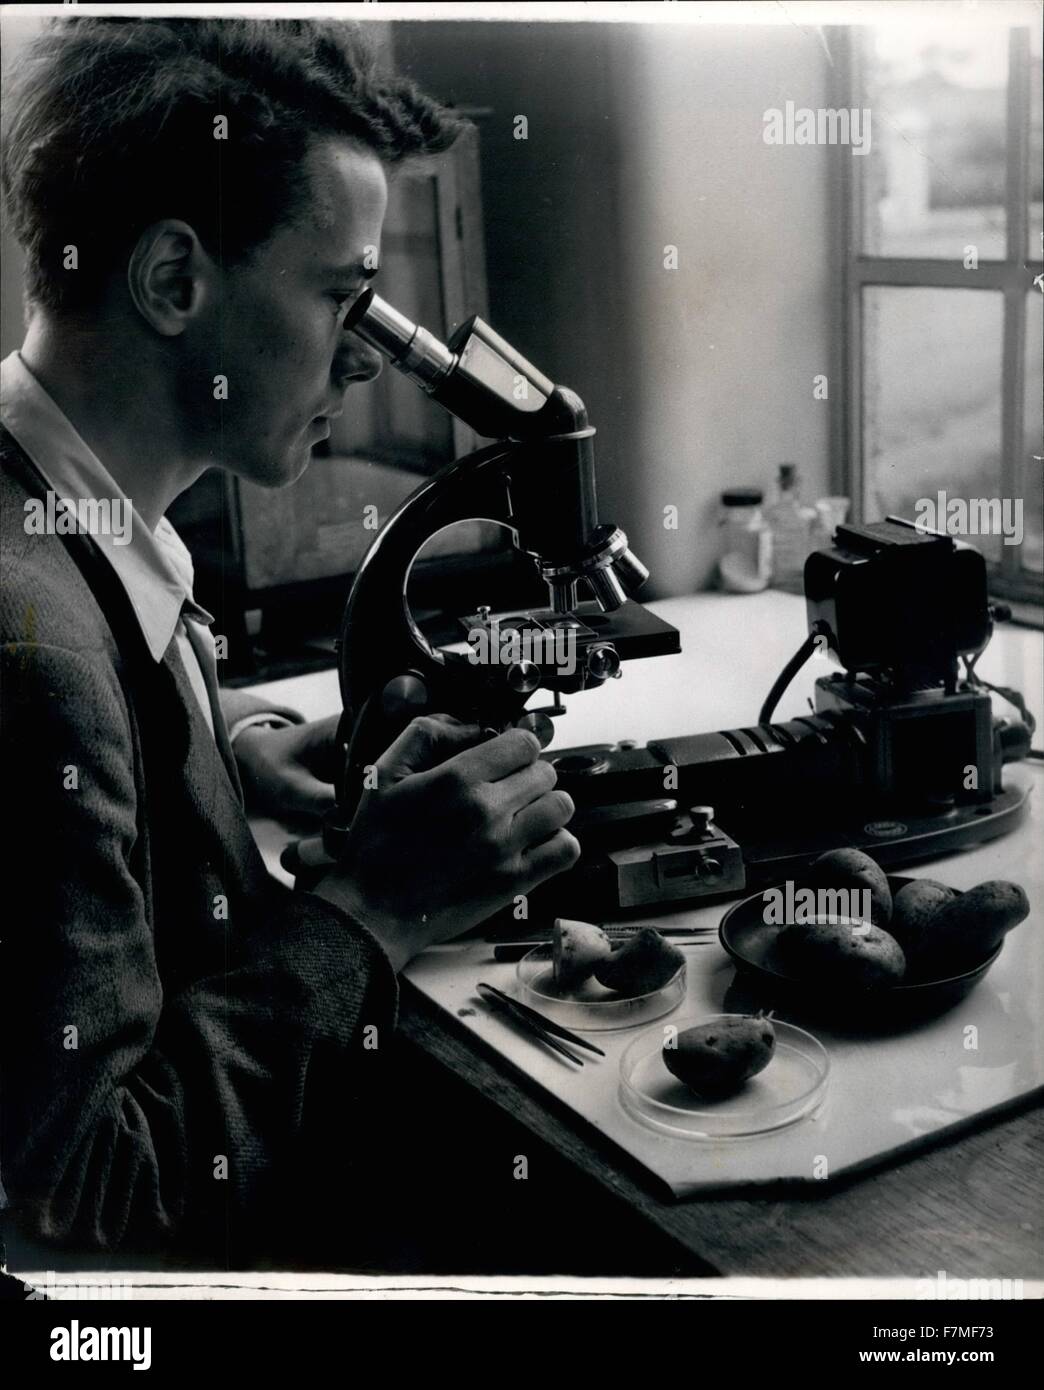 1963 - Searching For The Perfect Potato: Laboratory Assistant, D.A. Wilkins examined a newly dug potato for scabs, under the microscope. 15 Years Research For The Perfect Potato: Scotland still leads the world in potato breeding. It was Dr. William Black of Boghall Farm near Edinburgh, Scotland, who discovered the world's best and flawless potato in 1946 after working on it for 20 years and called it the ''Craig's Bounty''. Research still goes on to counter Stunt Diseases in potatoes and the various odd ailments that effect it. Dr. Black continues his researches with other experts like Dr. G.C Stock Photo